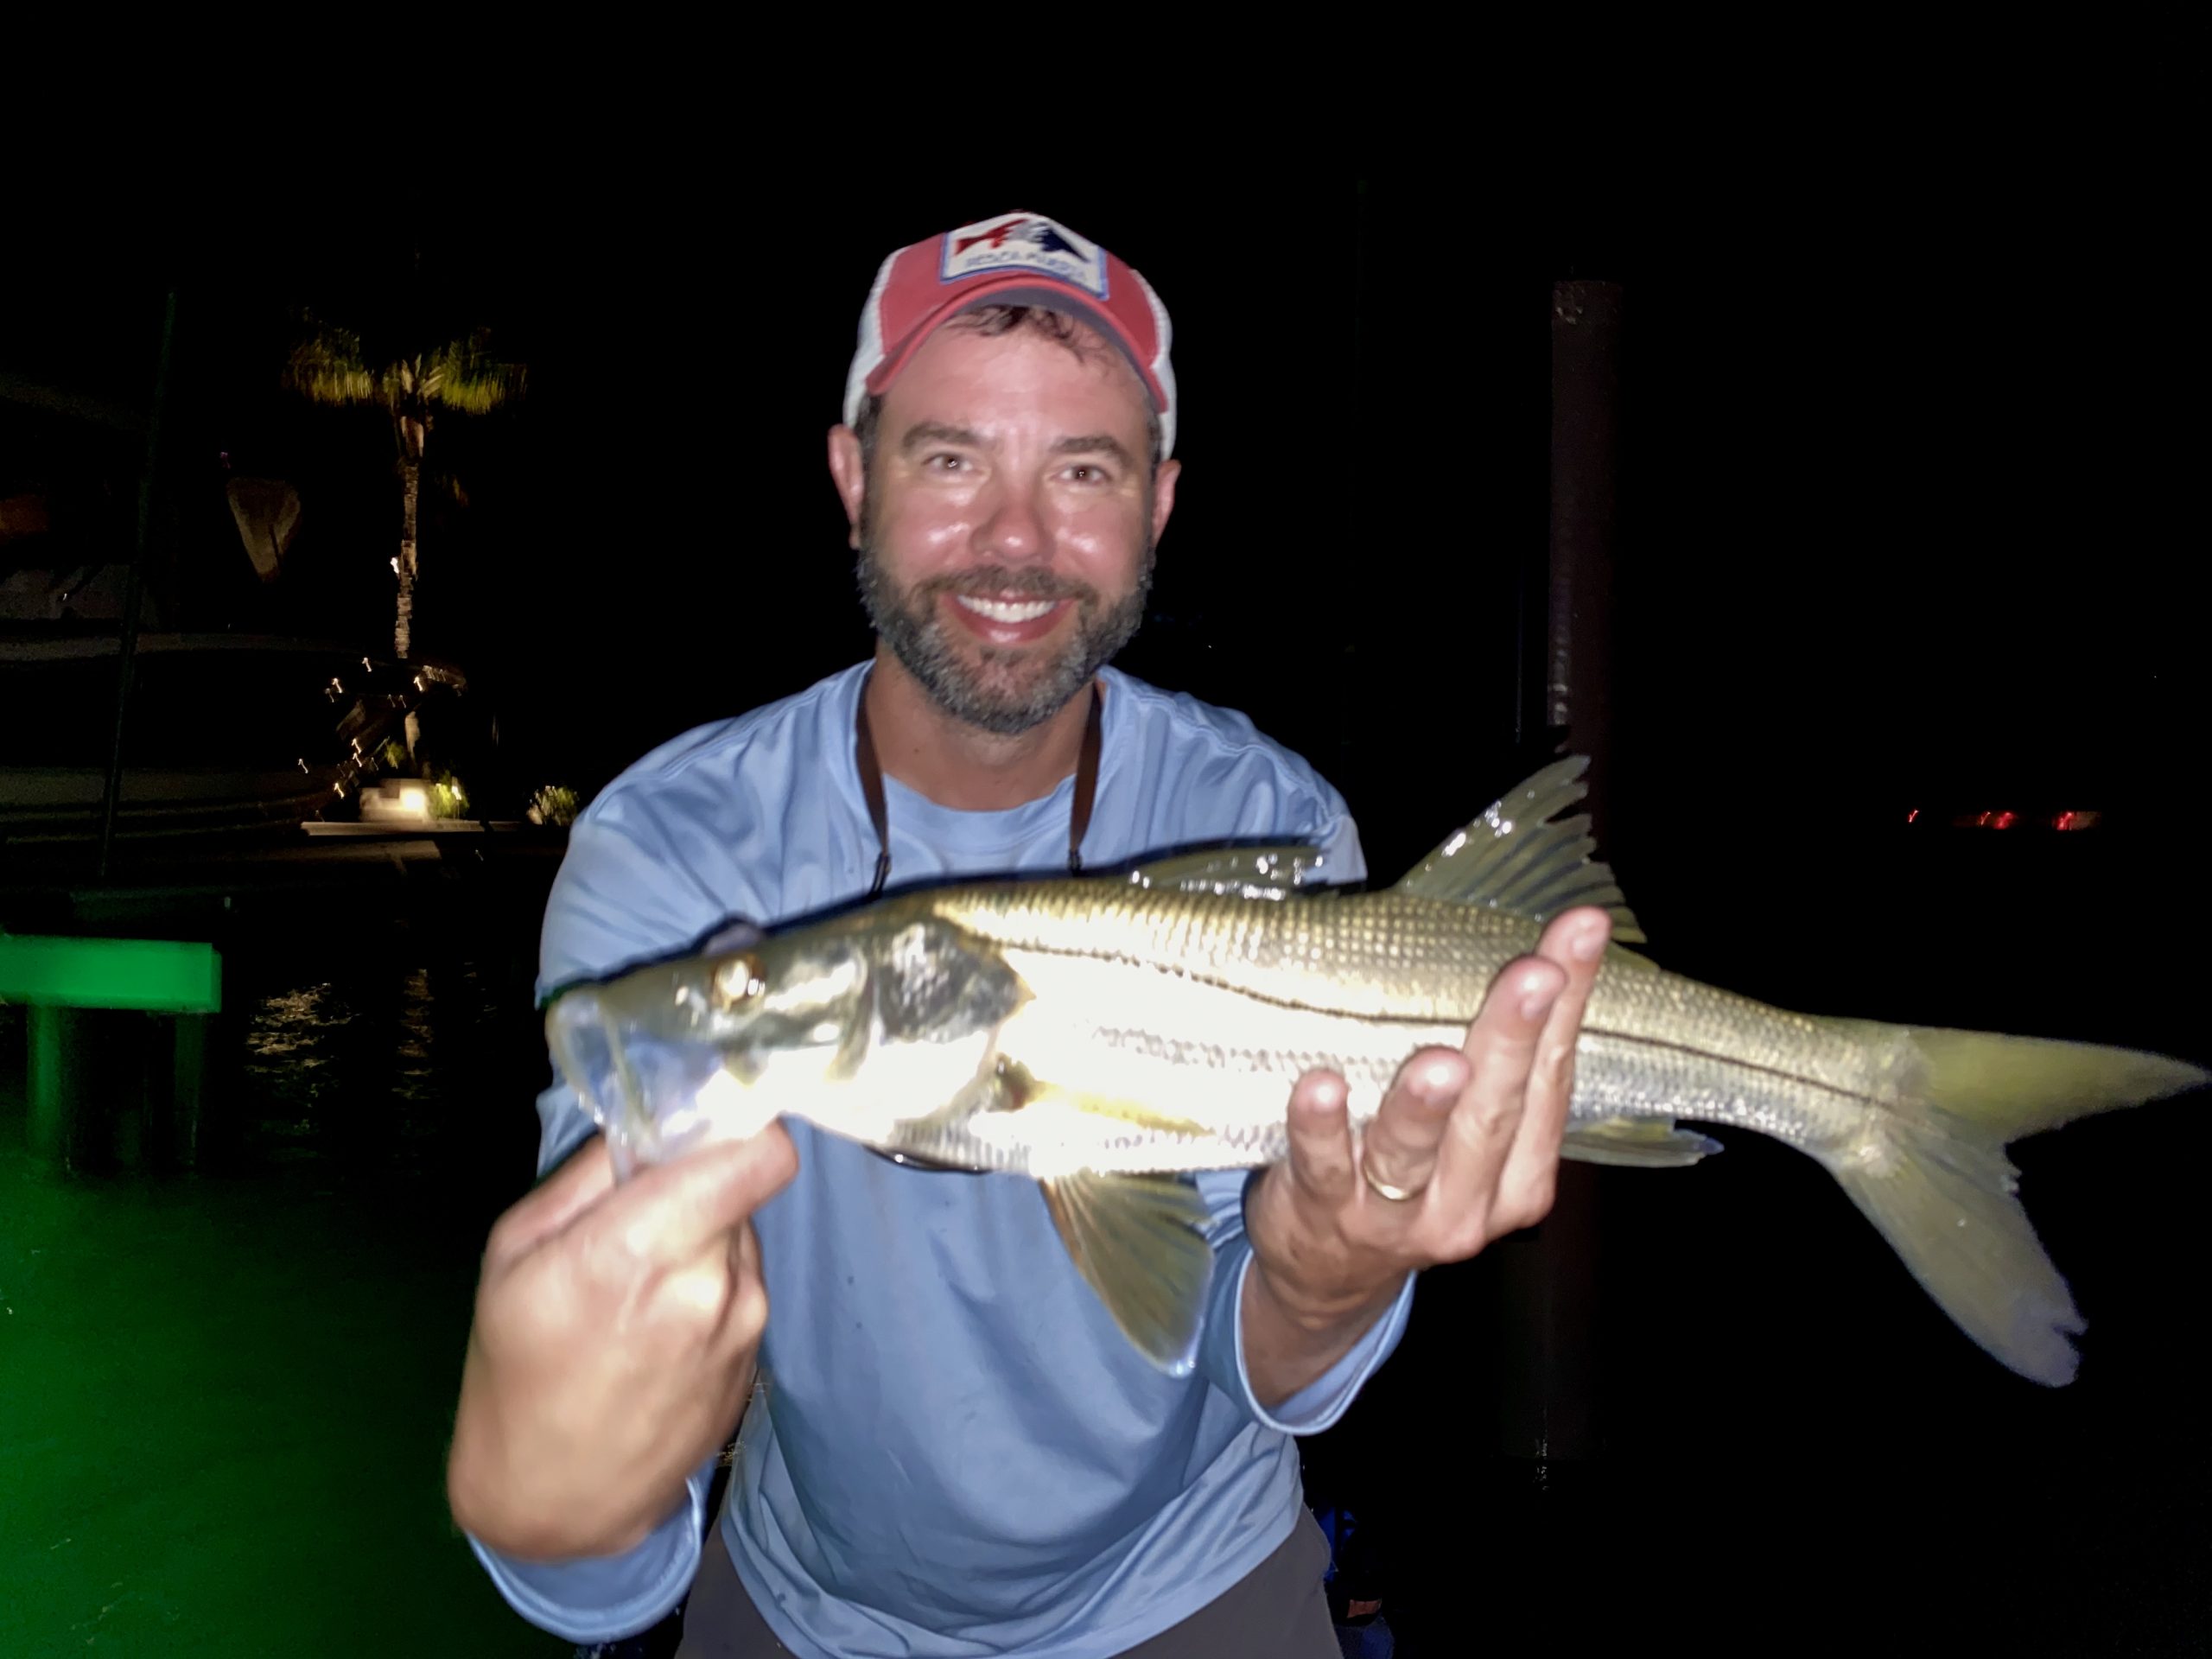 An angler holds a snook caught while fly fishing in Sarasota, FL